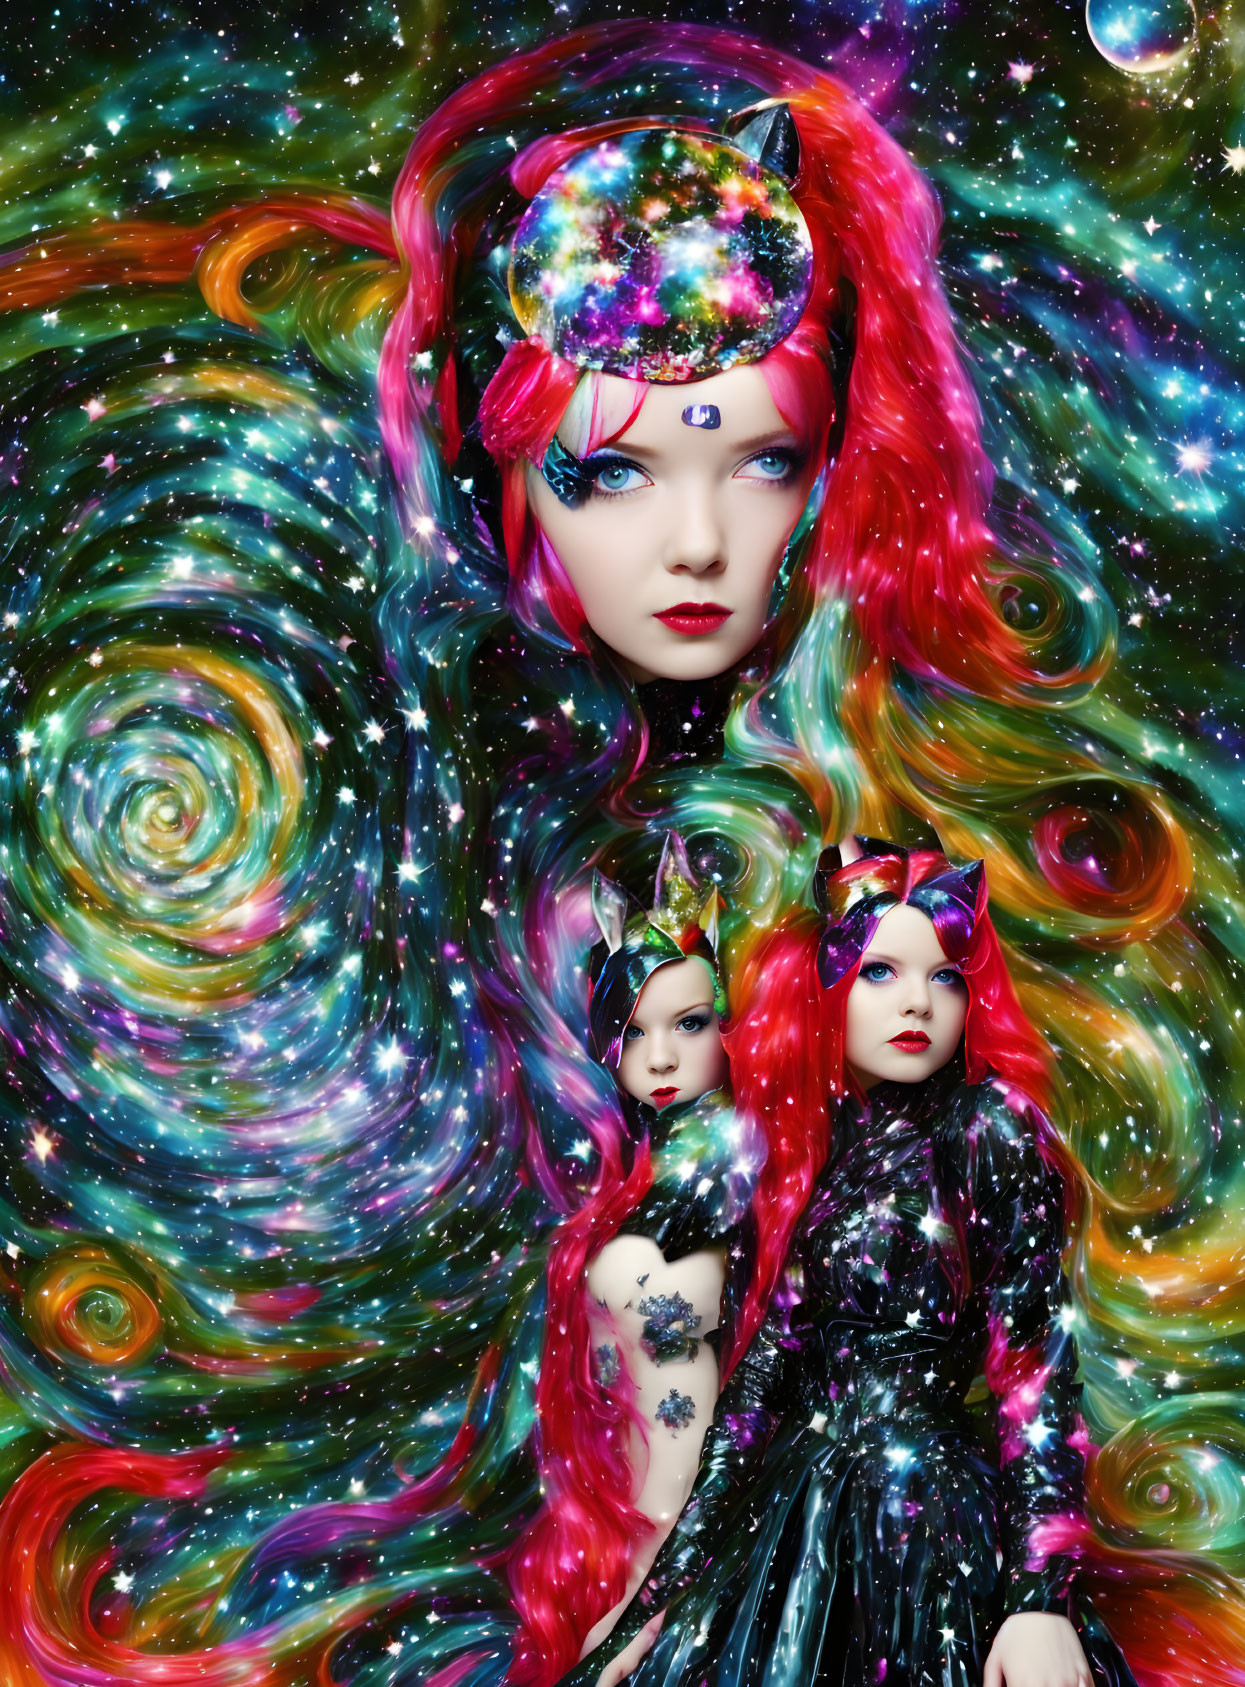 Vivid red hair figures in cosmic-themed attire against galaxy backdrop